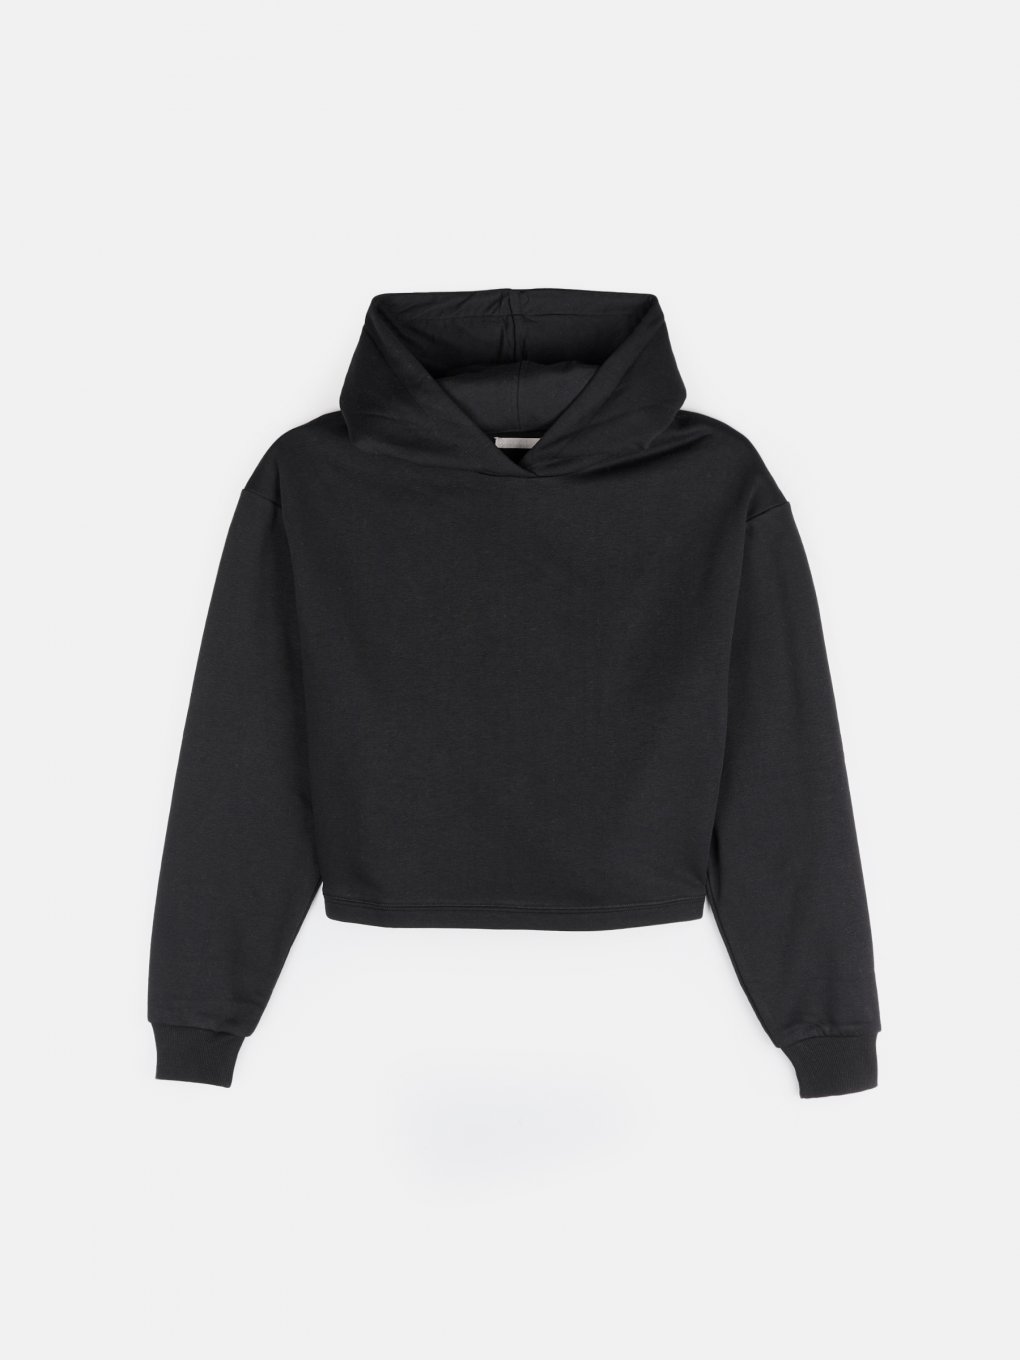 Hoodie with detail on back